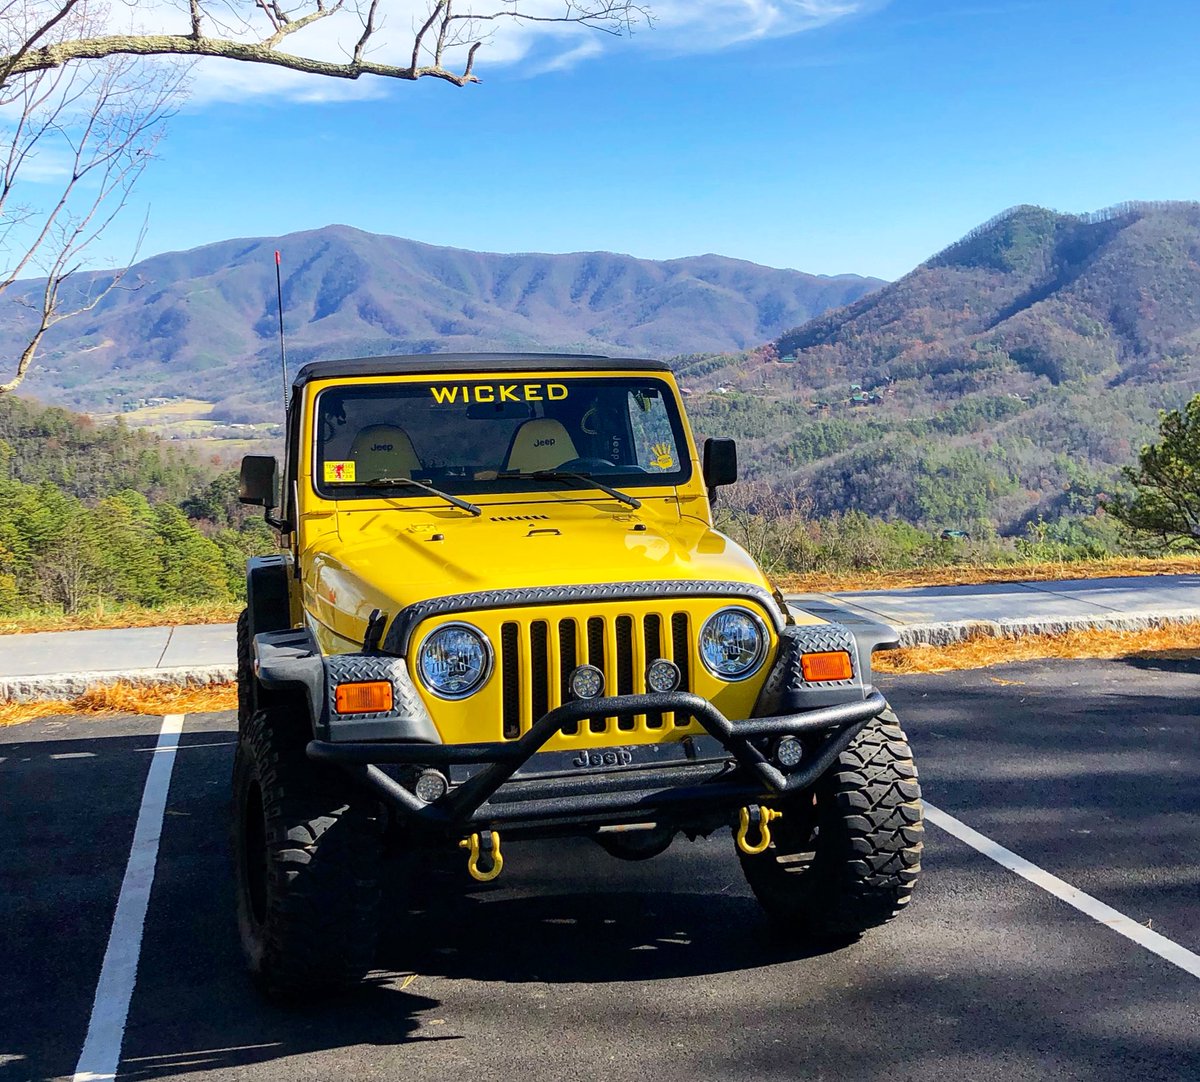 A jeep ride with a view.